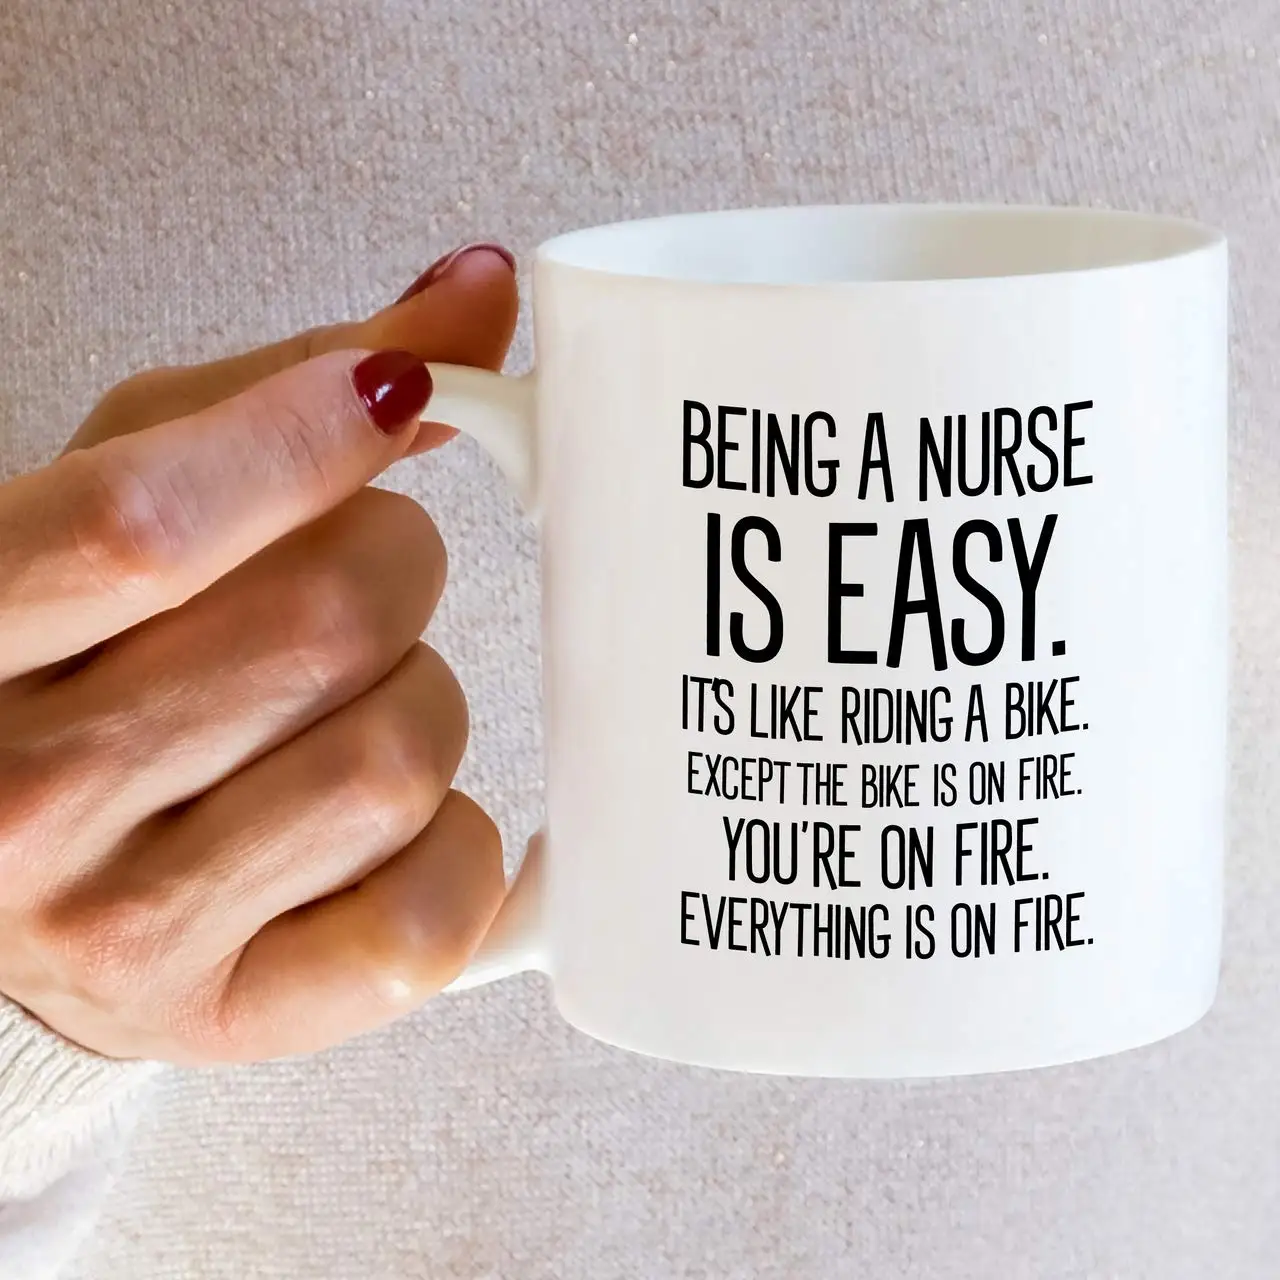 

Being A Nurse Is Easy Ceramic Coffee Mugs Funny Nursing Student Inspirational Birthday Gifts for Friends Coworkers Sister Mom